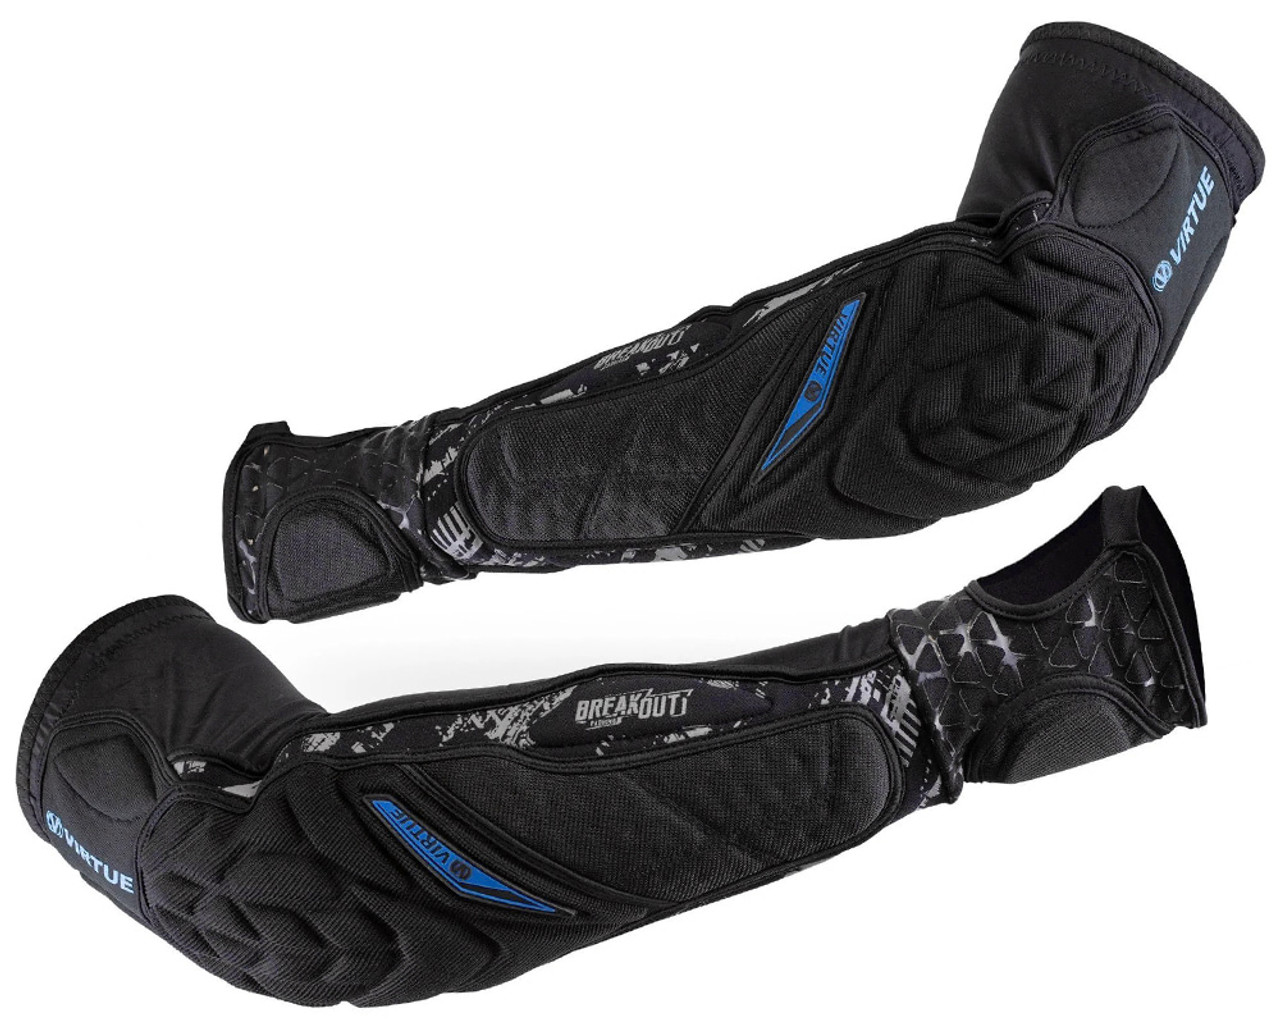 Virtue Breakout Paintball Elbow Pads - Black